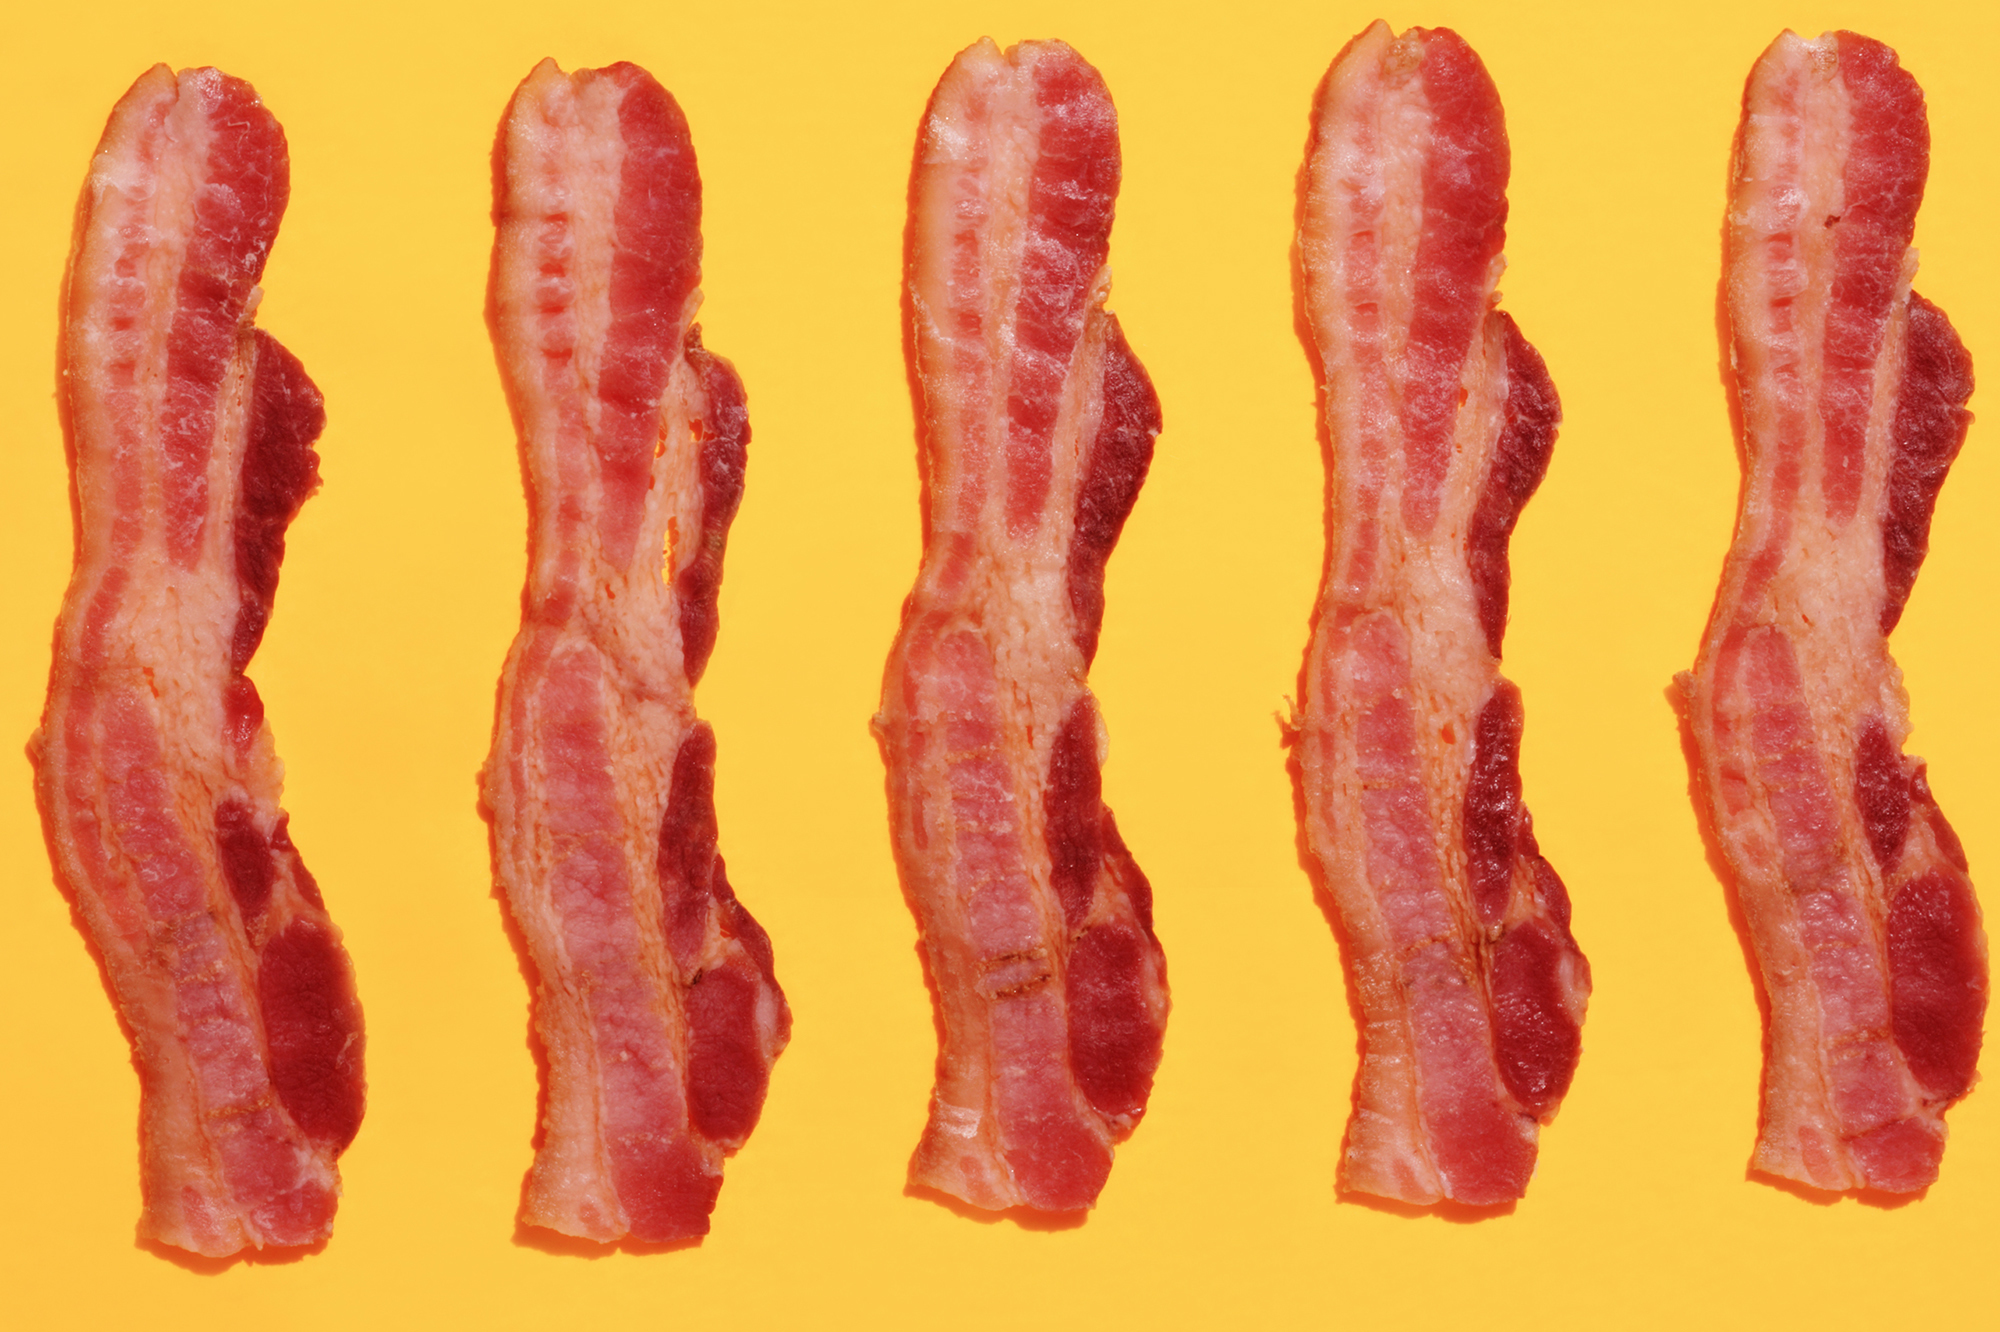 Consuming a diet that contains high amounts of red and processed meat such as bacon was linked to 8 percent of cardiometabolic deaths in the U.S.